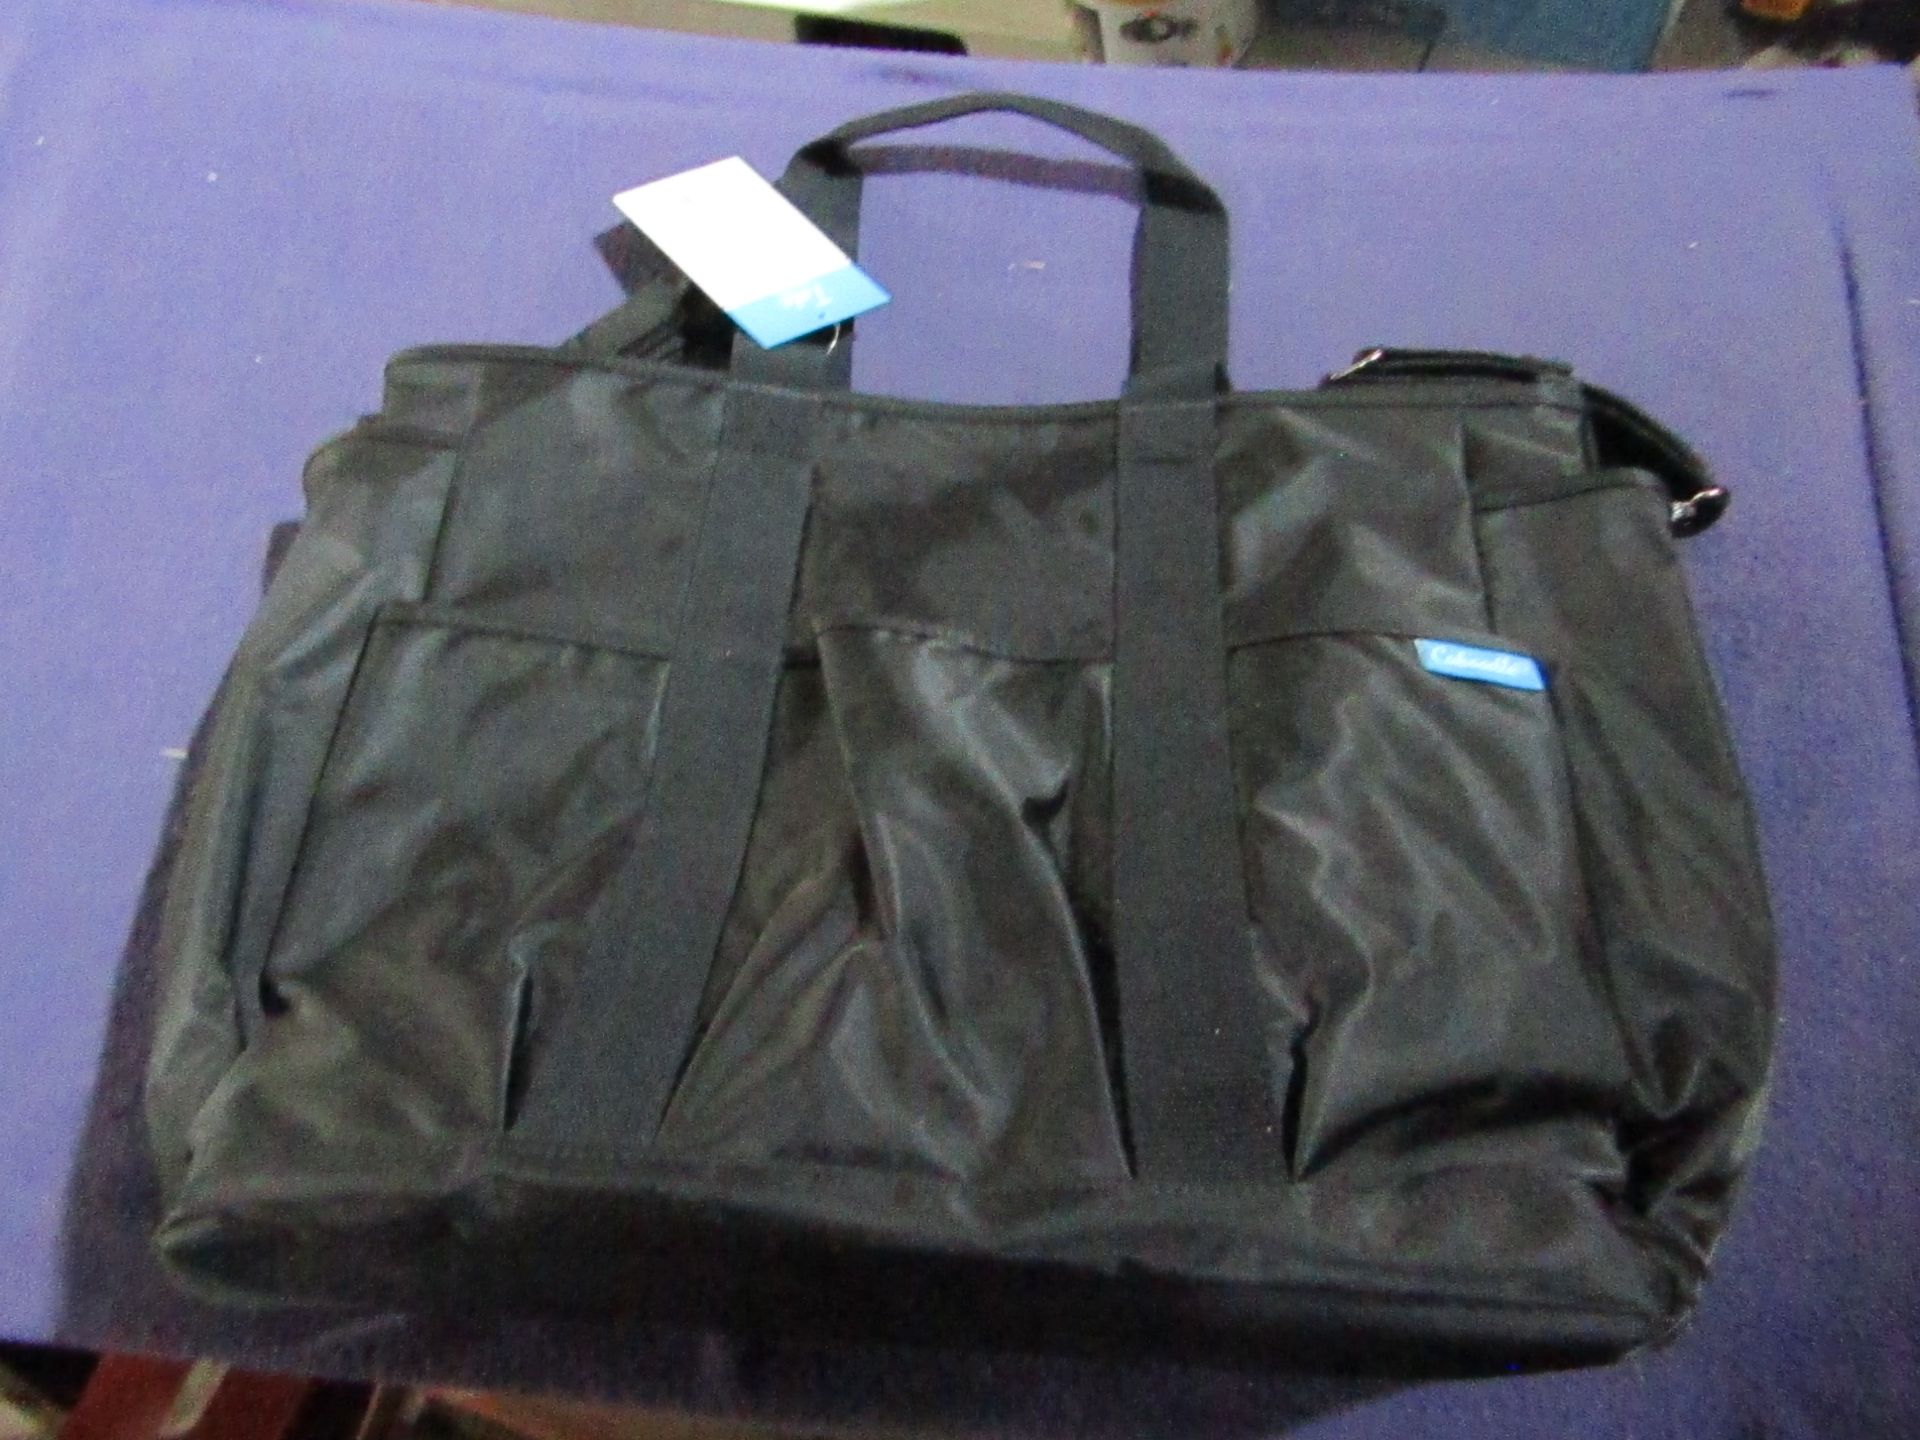 2x Caboodle - Tote Baby Travel Changing Baby - Black - New & Packaged.